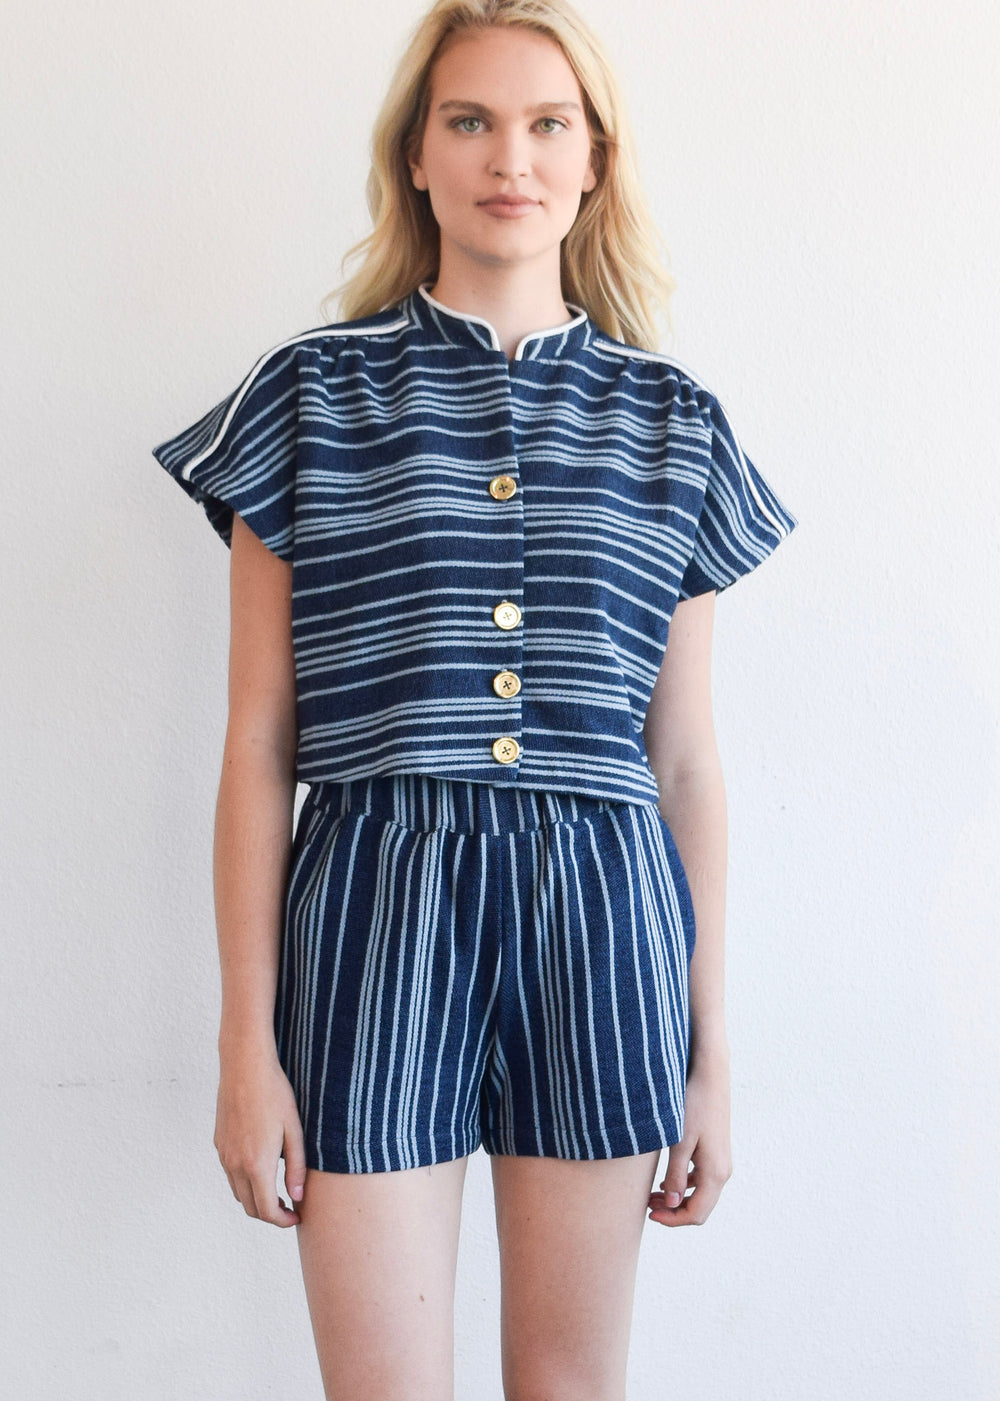 Pull On Shorts Navy Double Knit